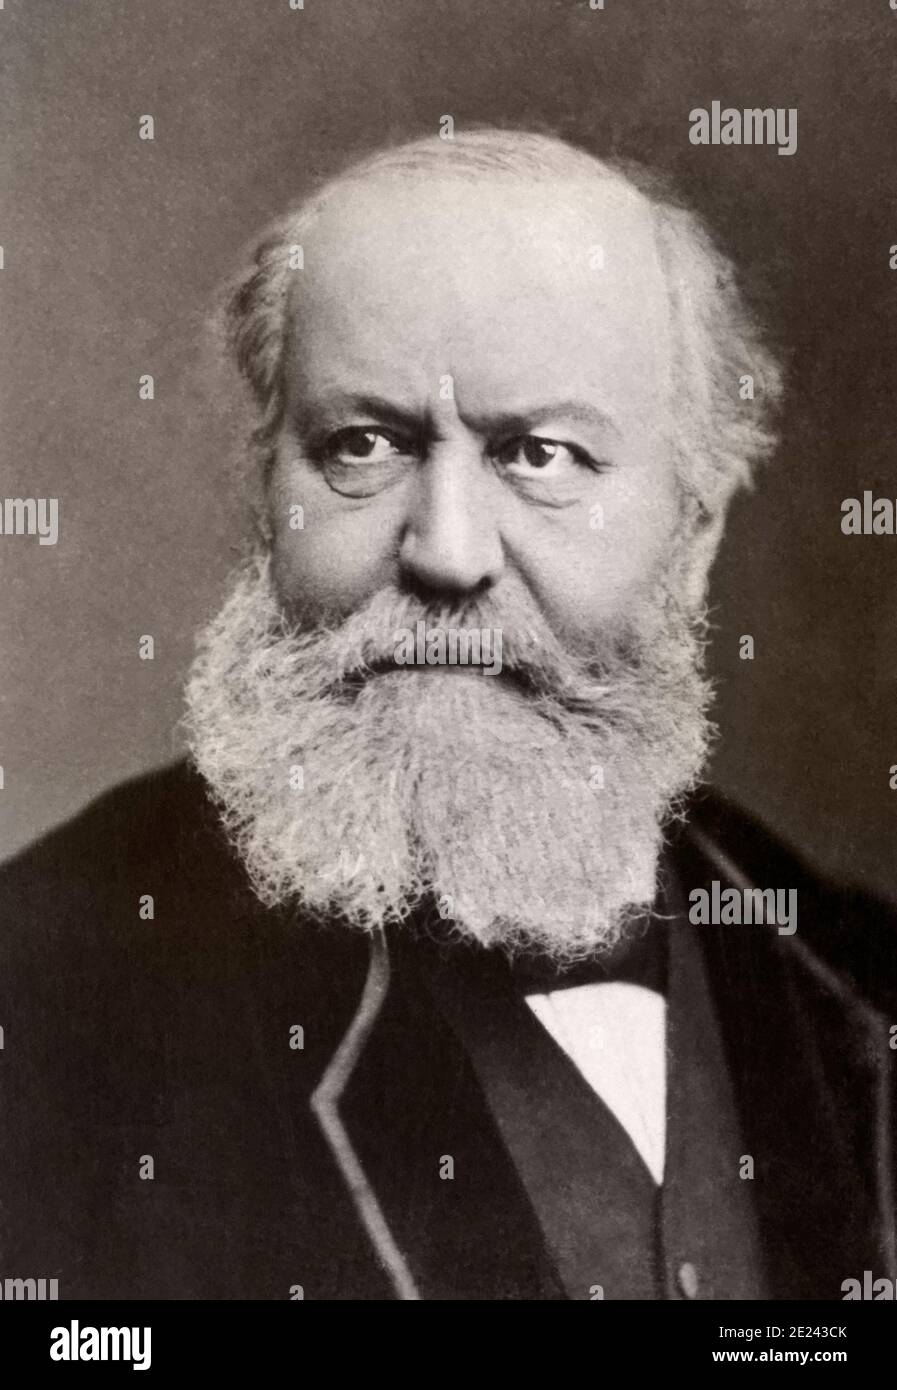 Charles-François Gounod (1818 – 1893) was a French composer, best known for his Ave Maria, based on a work by Bach, as well as his opera Faust. Stock Photo